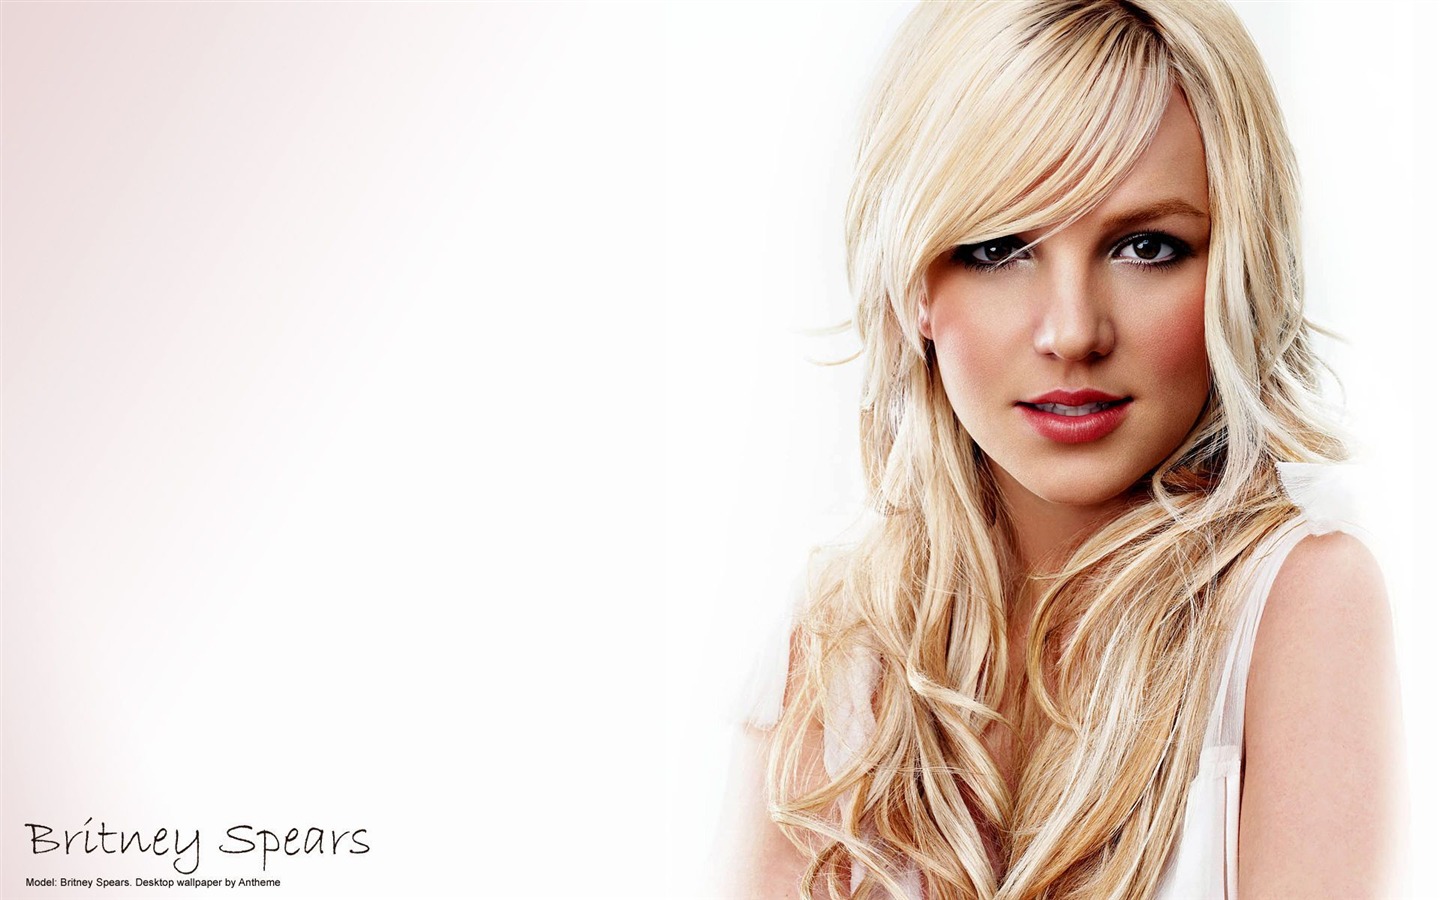 Britney Spears #015 - 1440x900 Wallpapers Pictures Photos Images